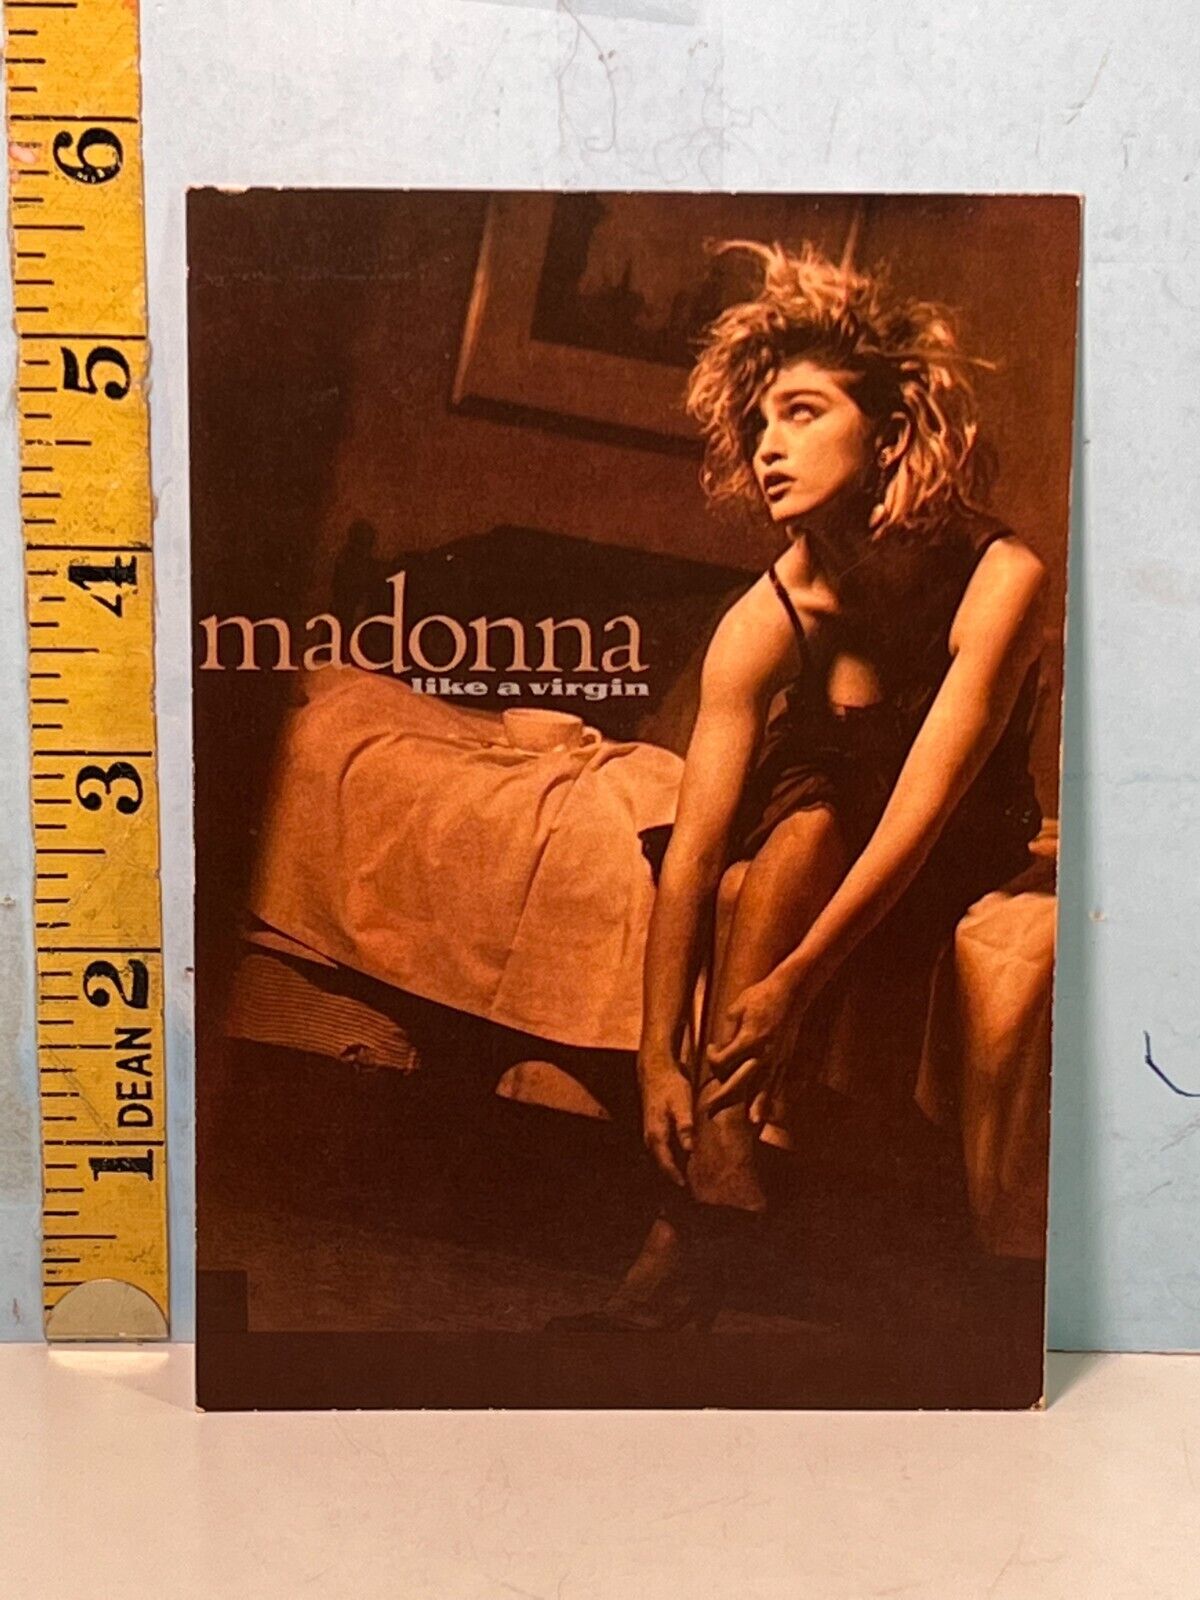 1990's Pinup Cheesecake Postcard: Madonna Like a Virger Record 71